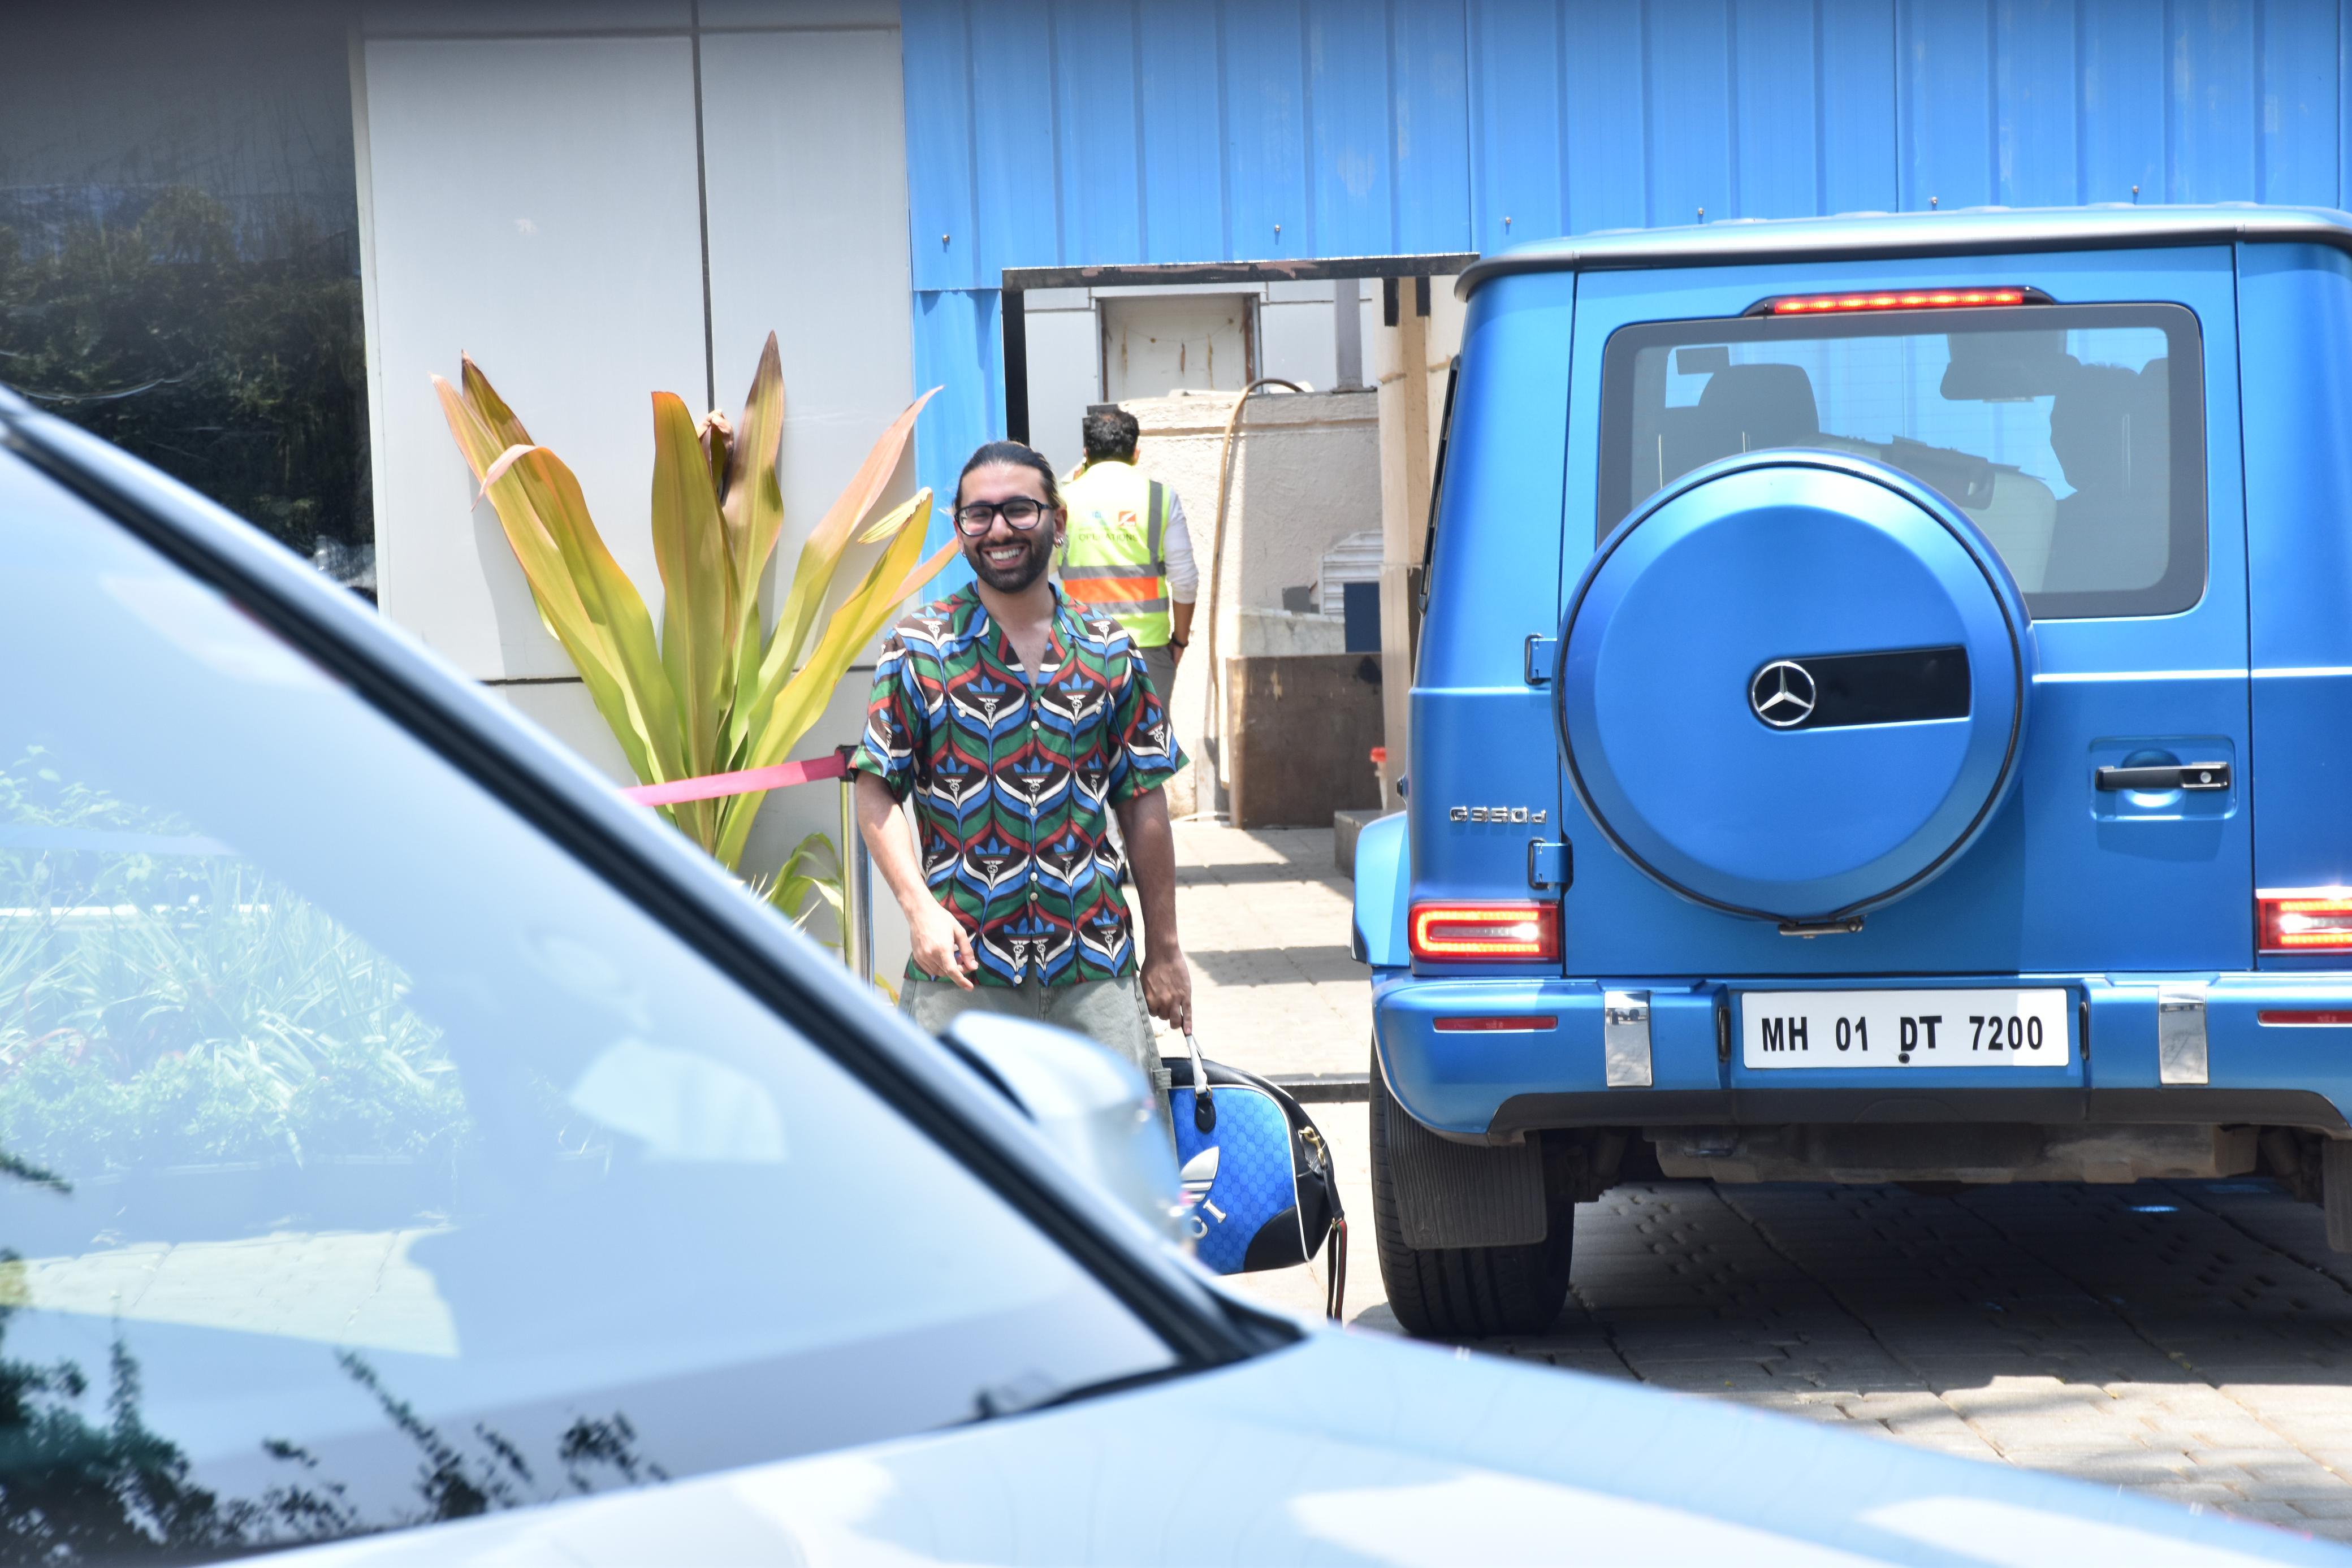 Orry and his signature blue wagon were spotted in Mumbai today